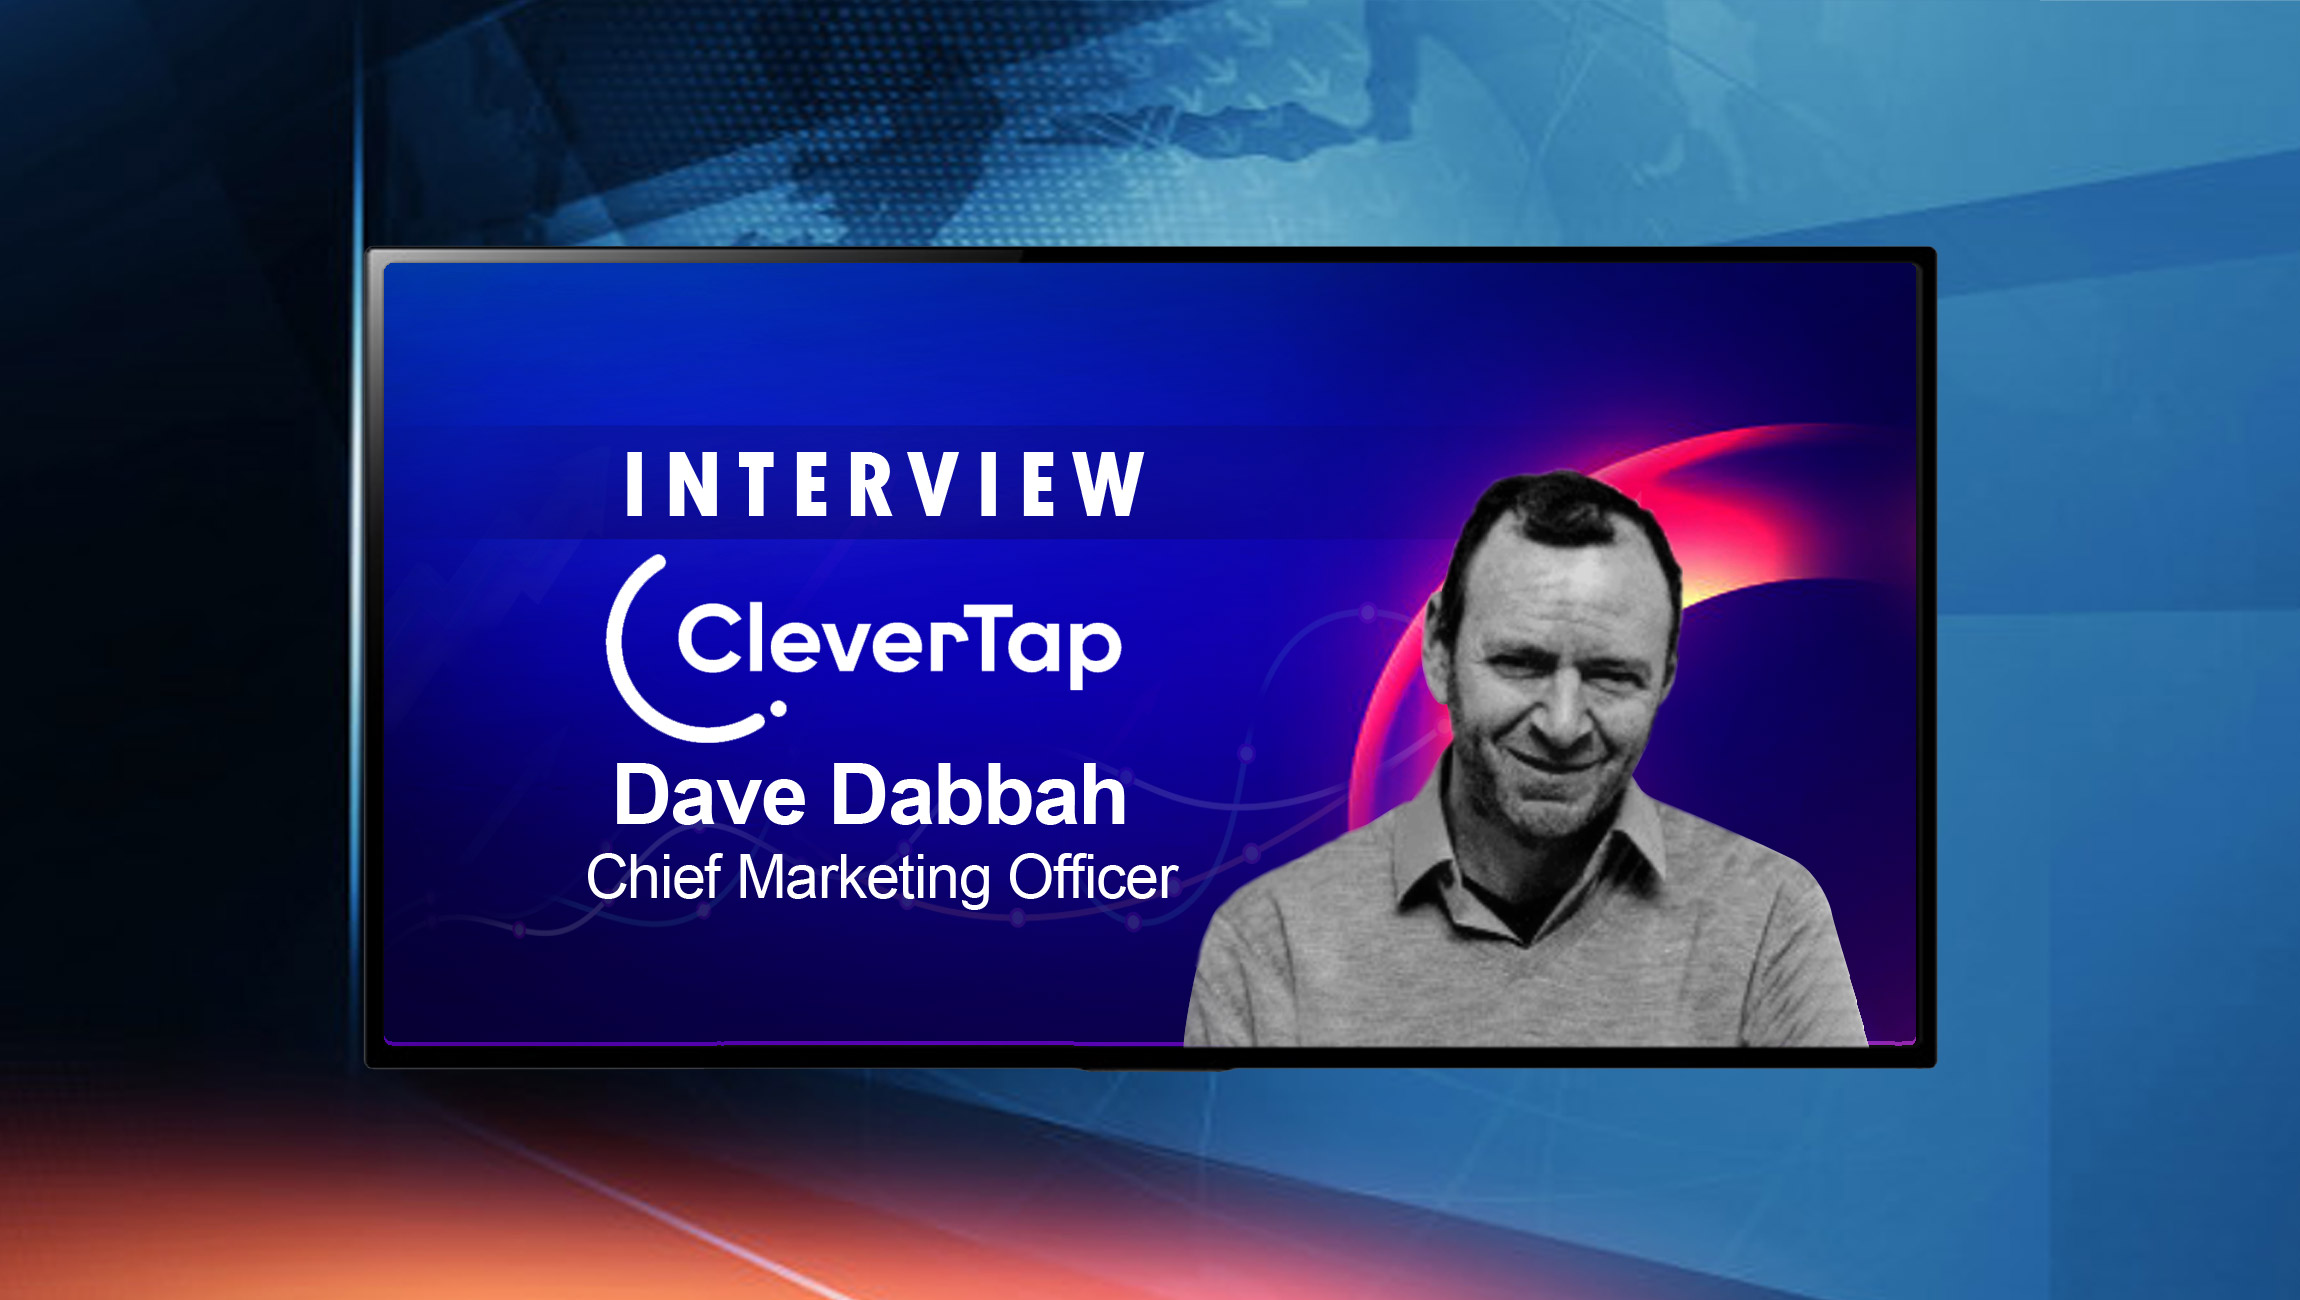 SalesTechStar Interview with Dave Dabbah, Chief Marketing Officer at CleverTap